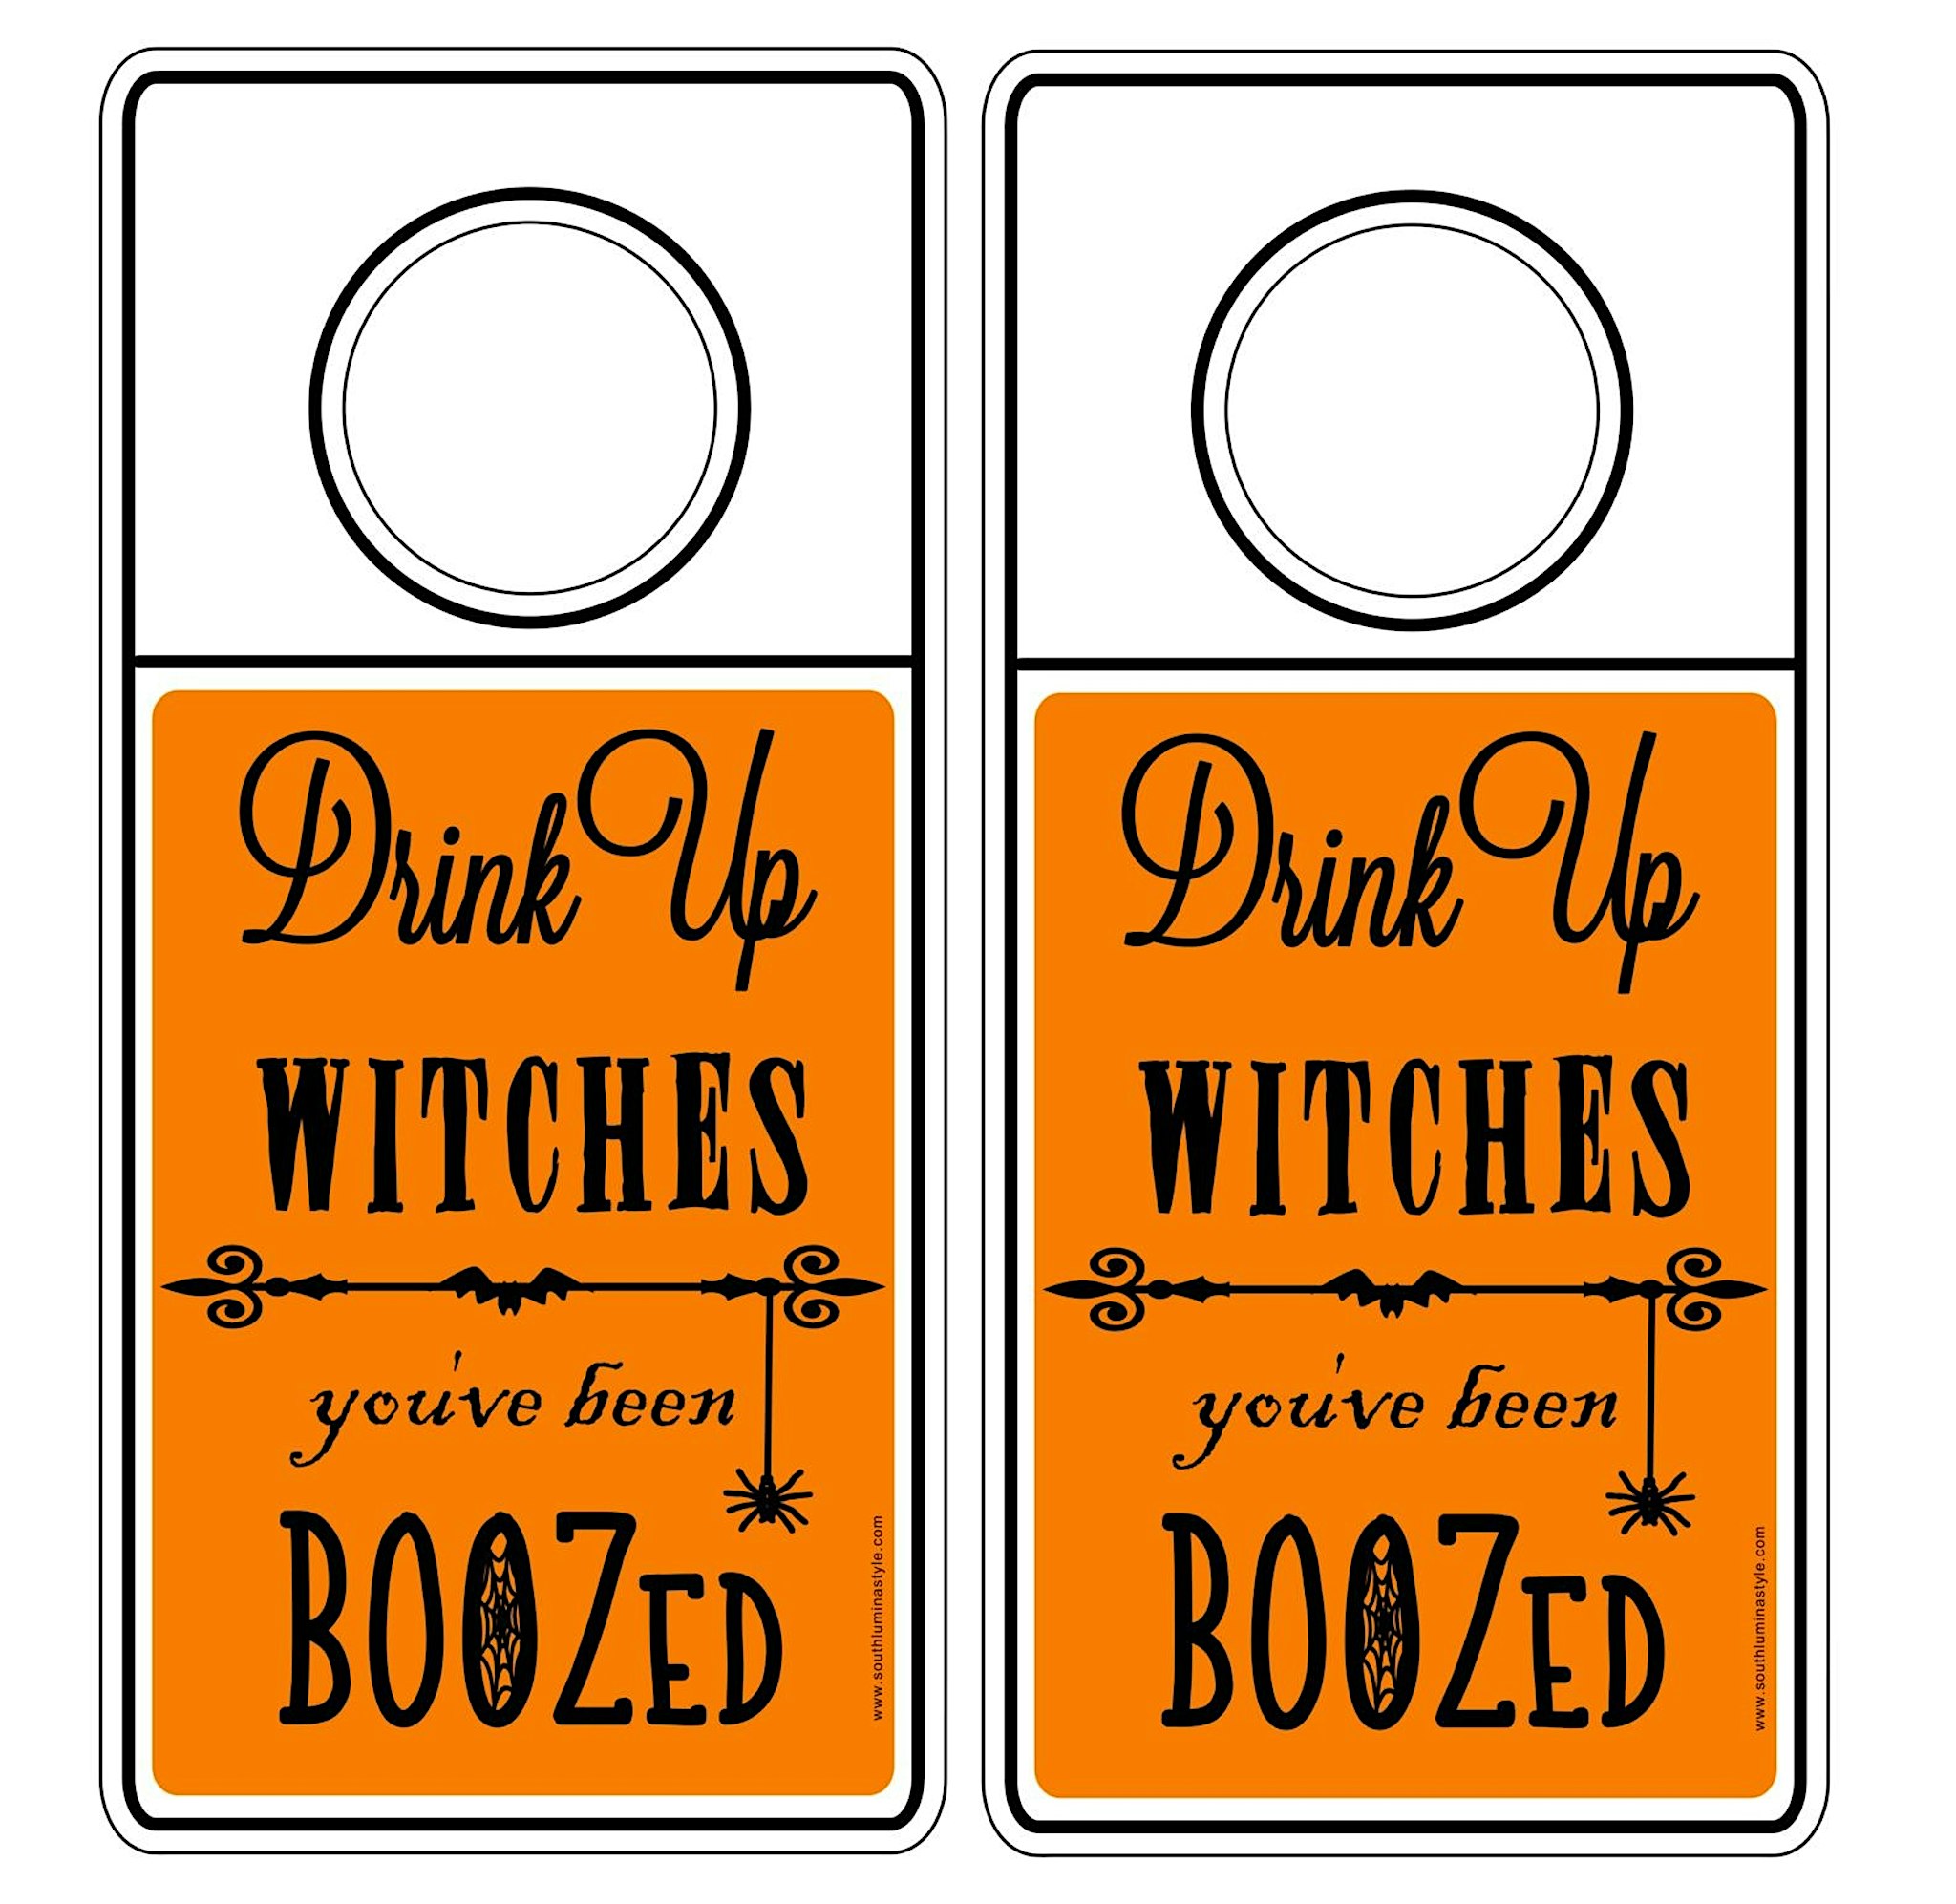 Drink up witches you’ve been boozed hang tag color